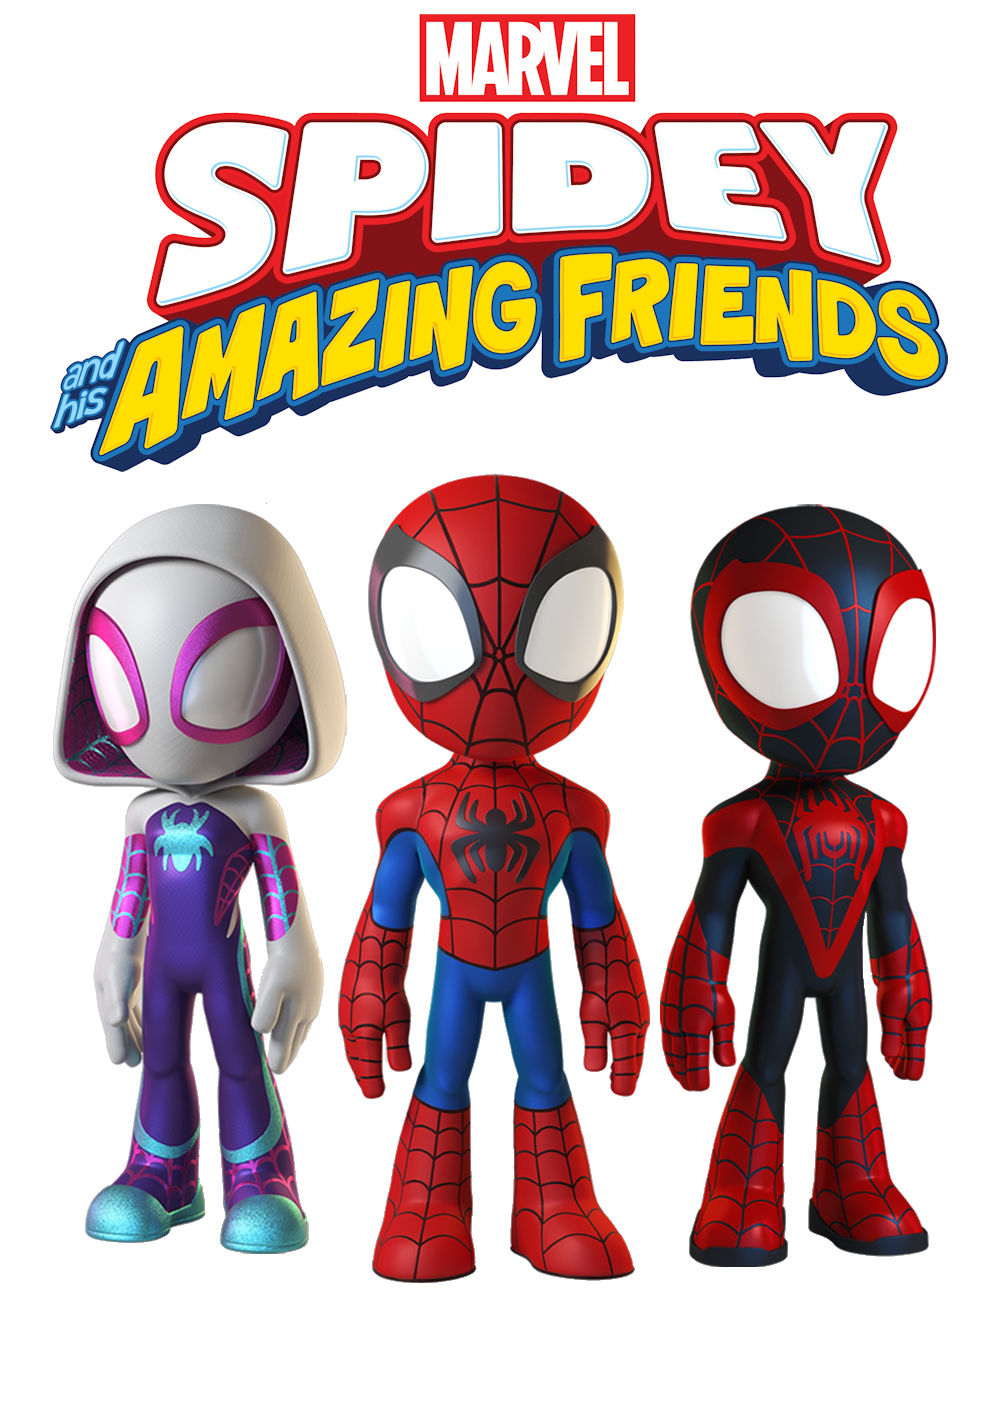 Marvel's Spidey and His Amazing Friends TVmaze